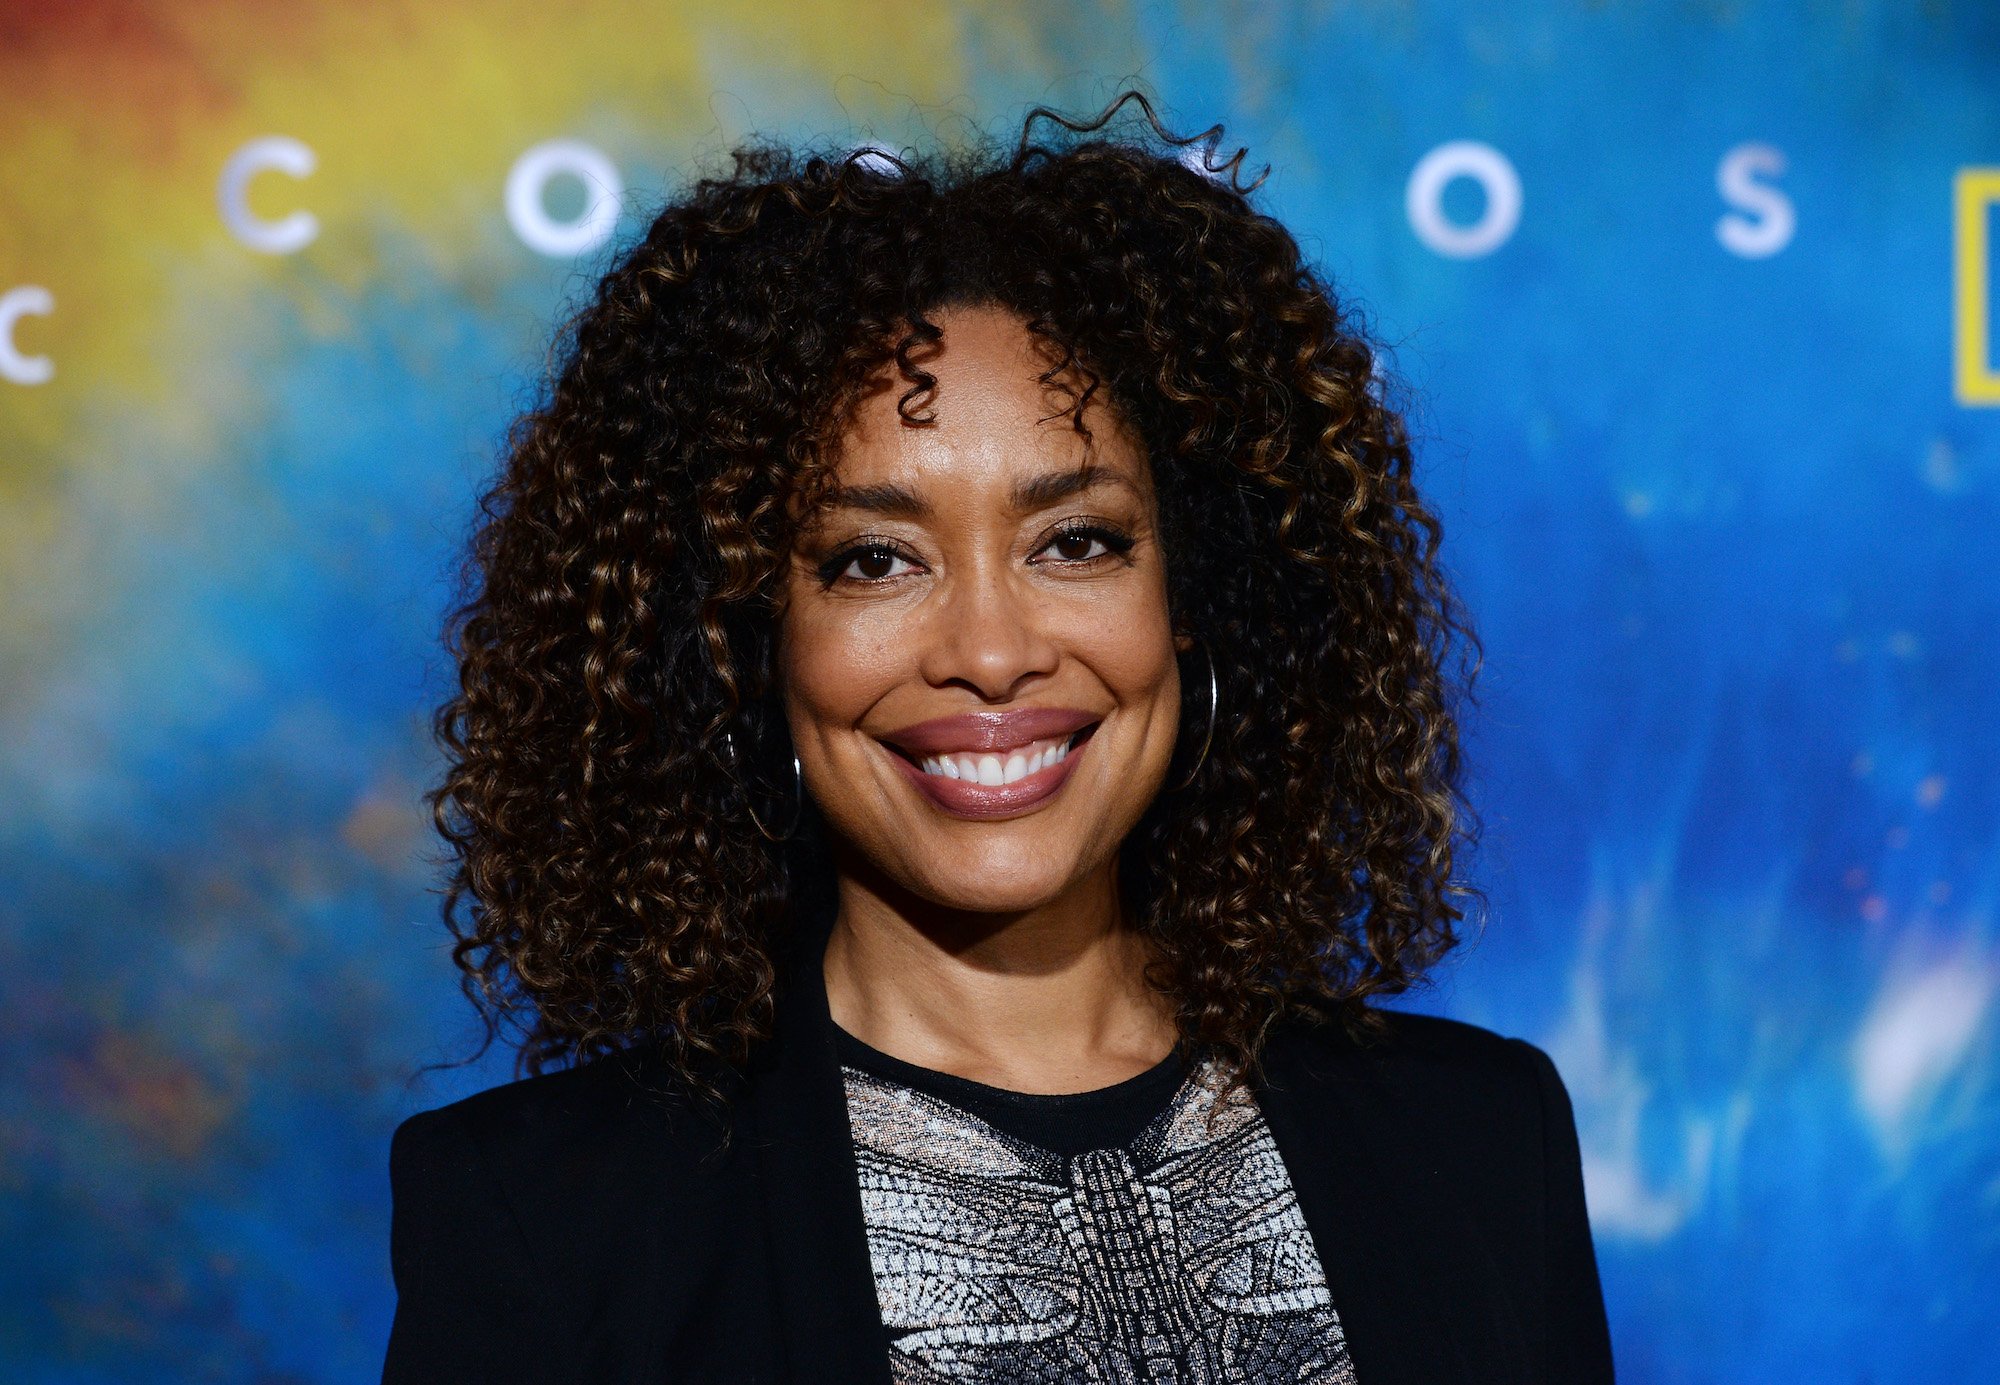 'Firefly' What Is Gina Torres's Net Worth?